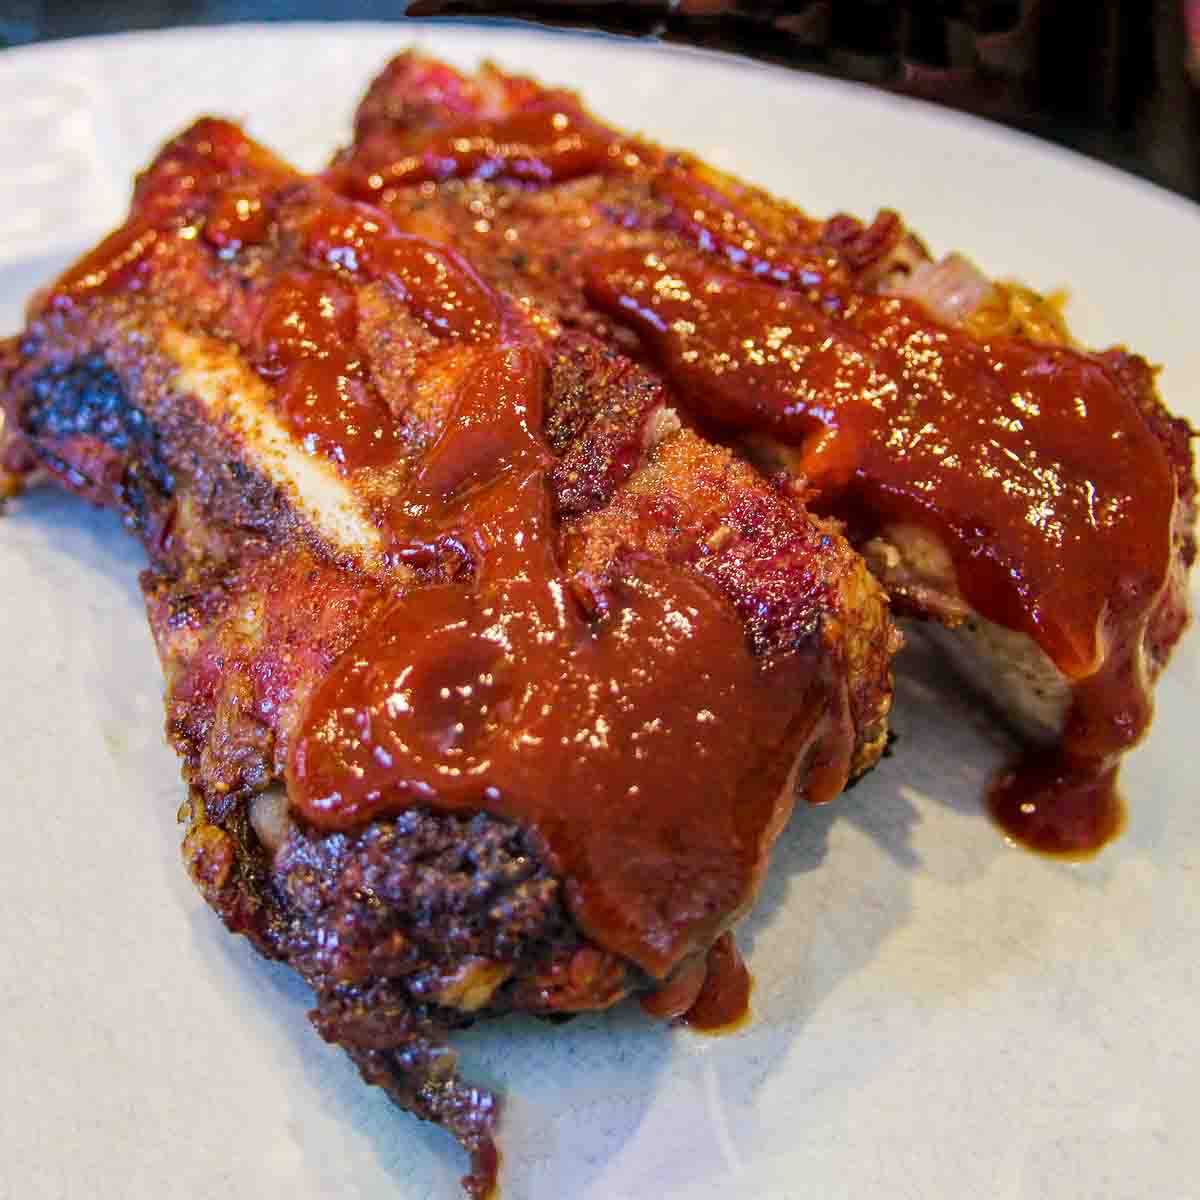 Ribs with sauce on white plate